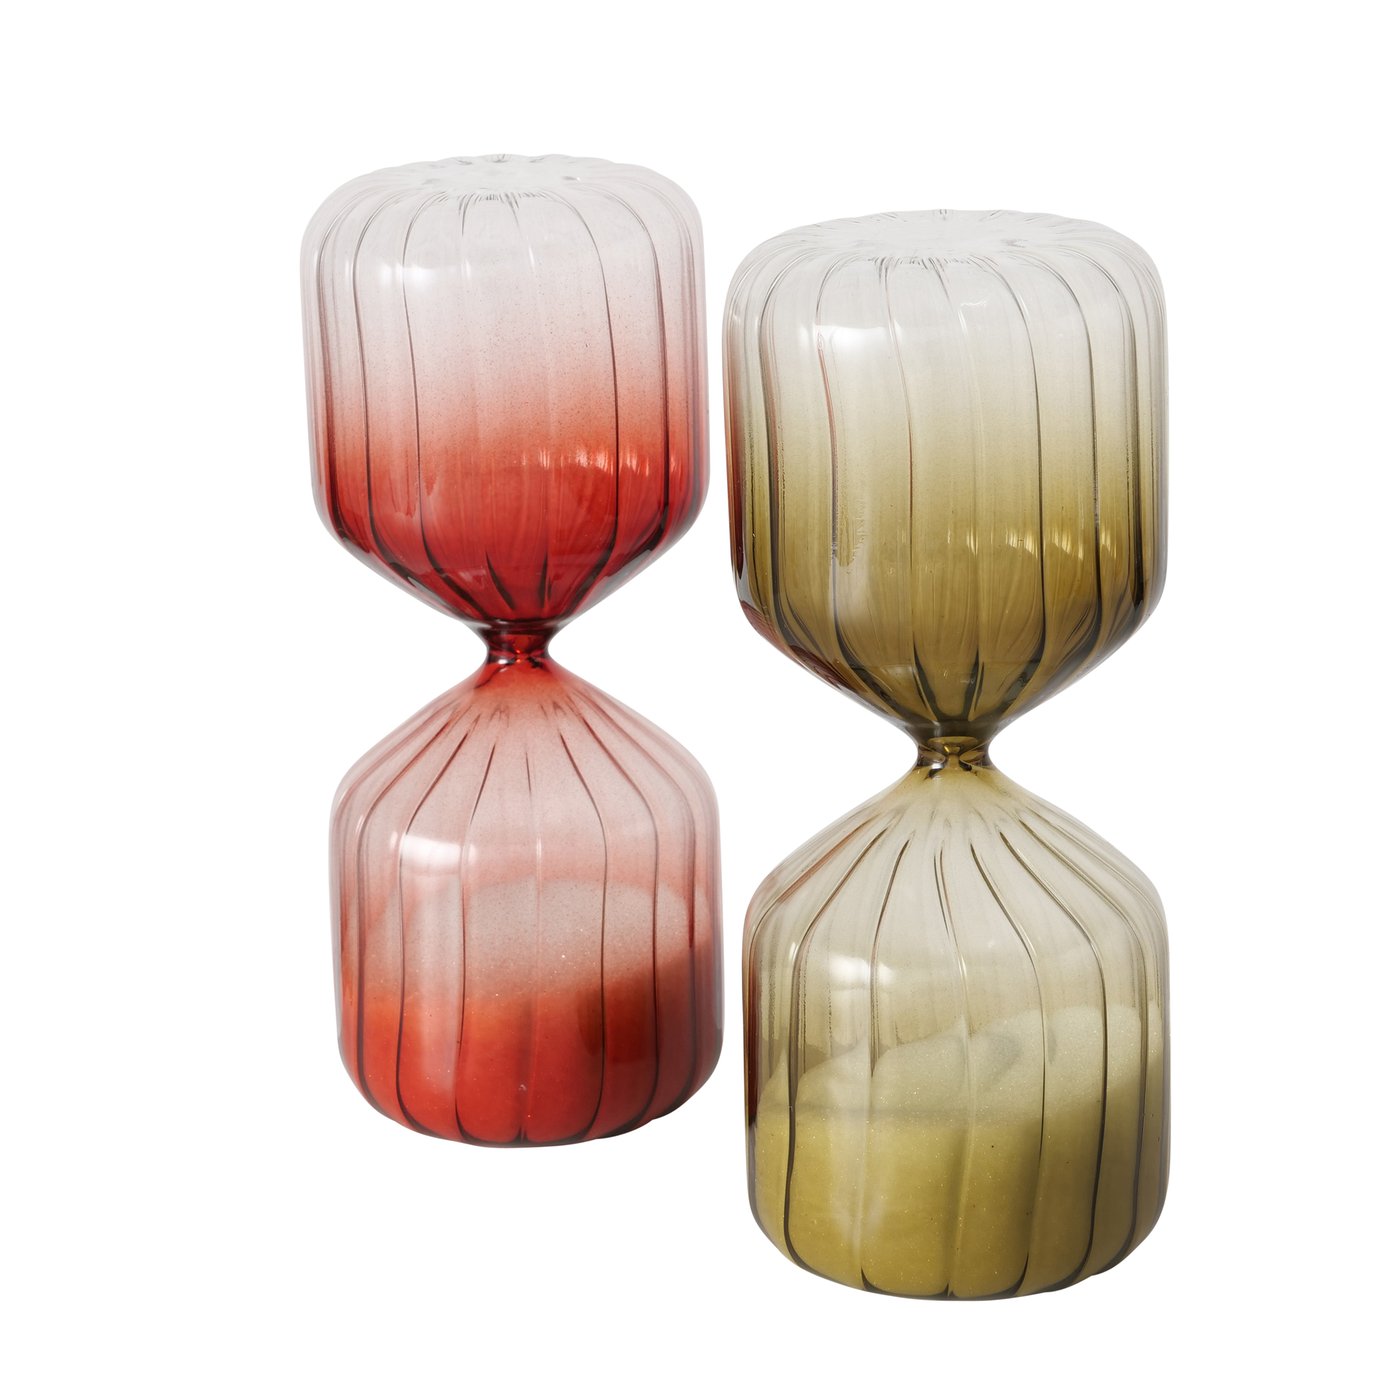 &Quirky Sutton Gradient Coloured Hour Glass : Red or Green